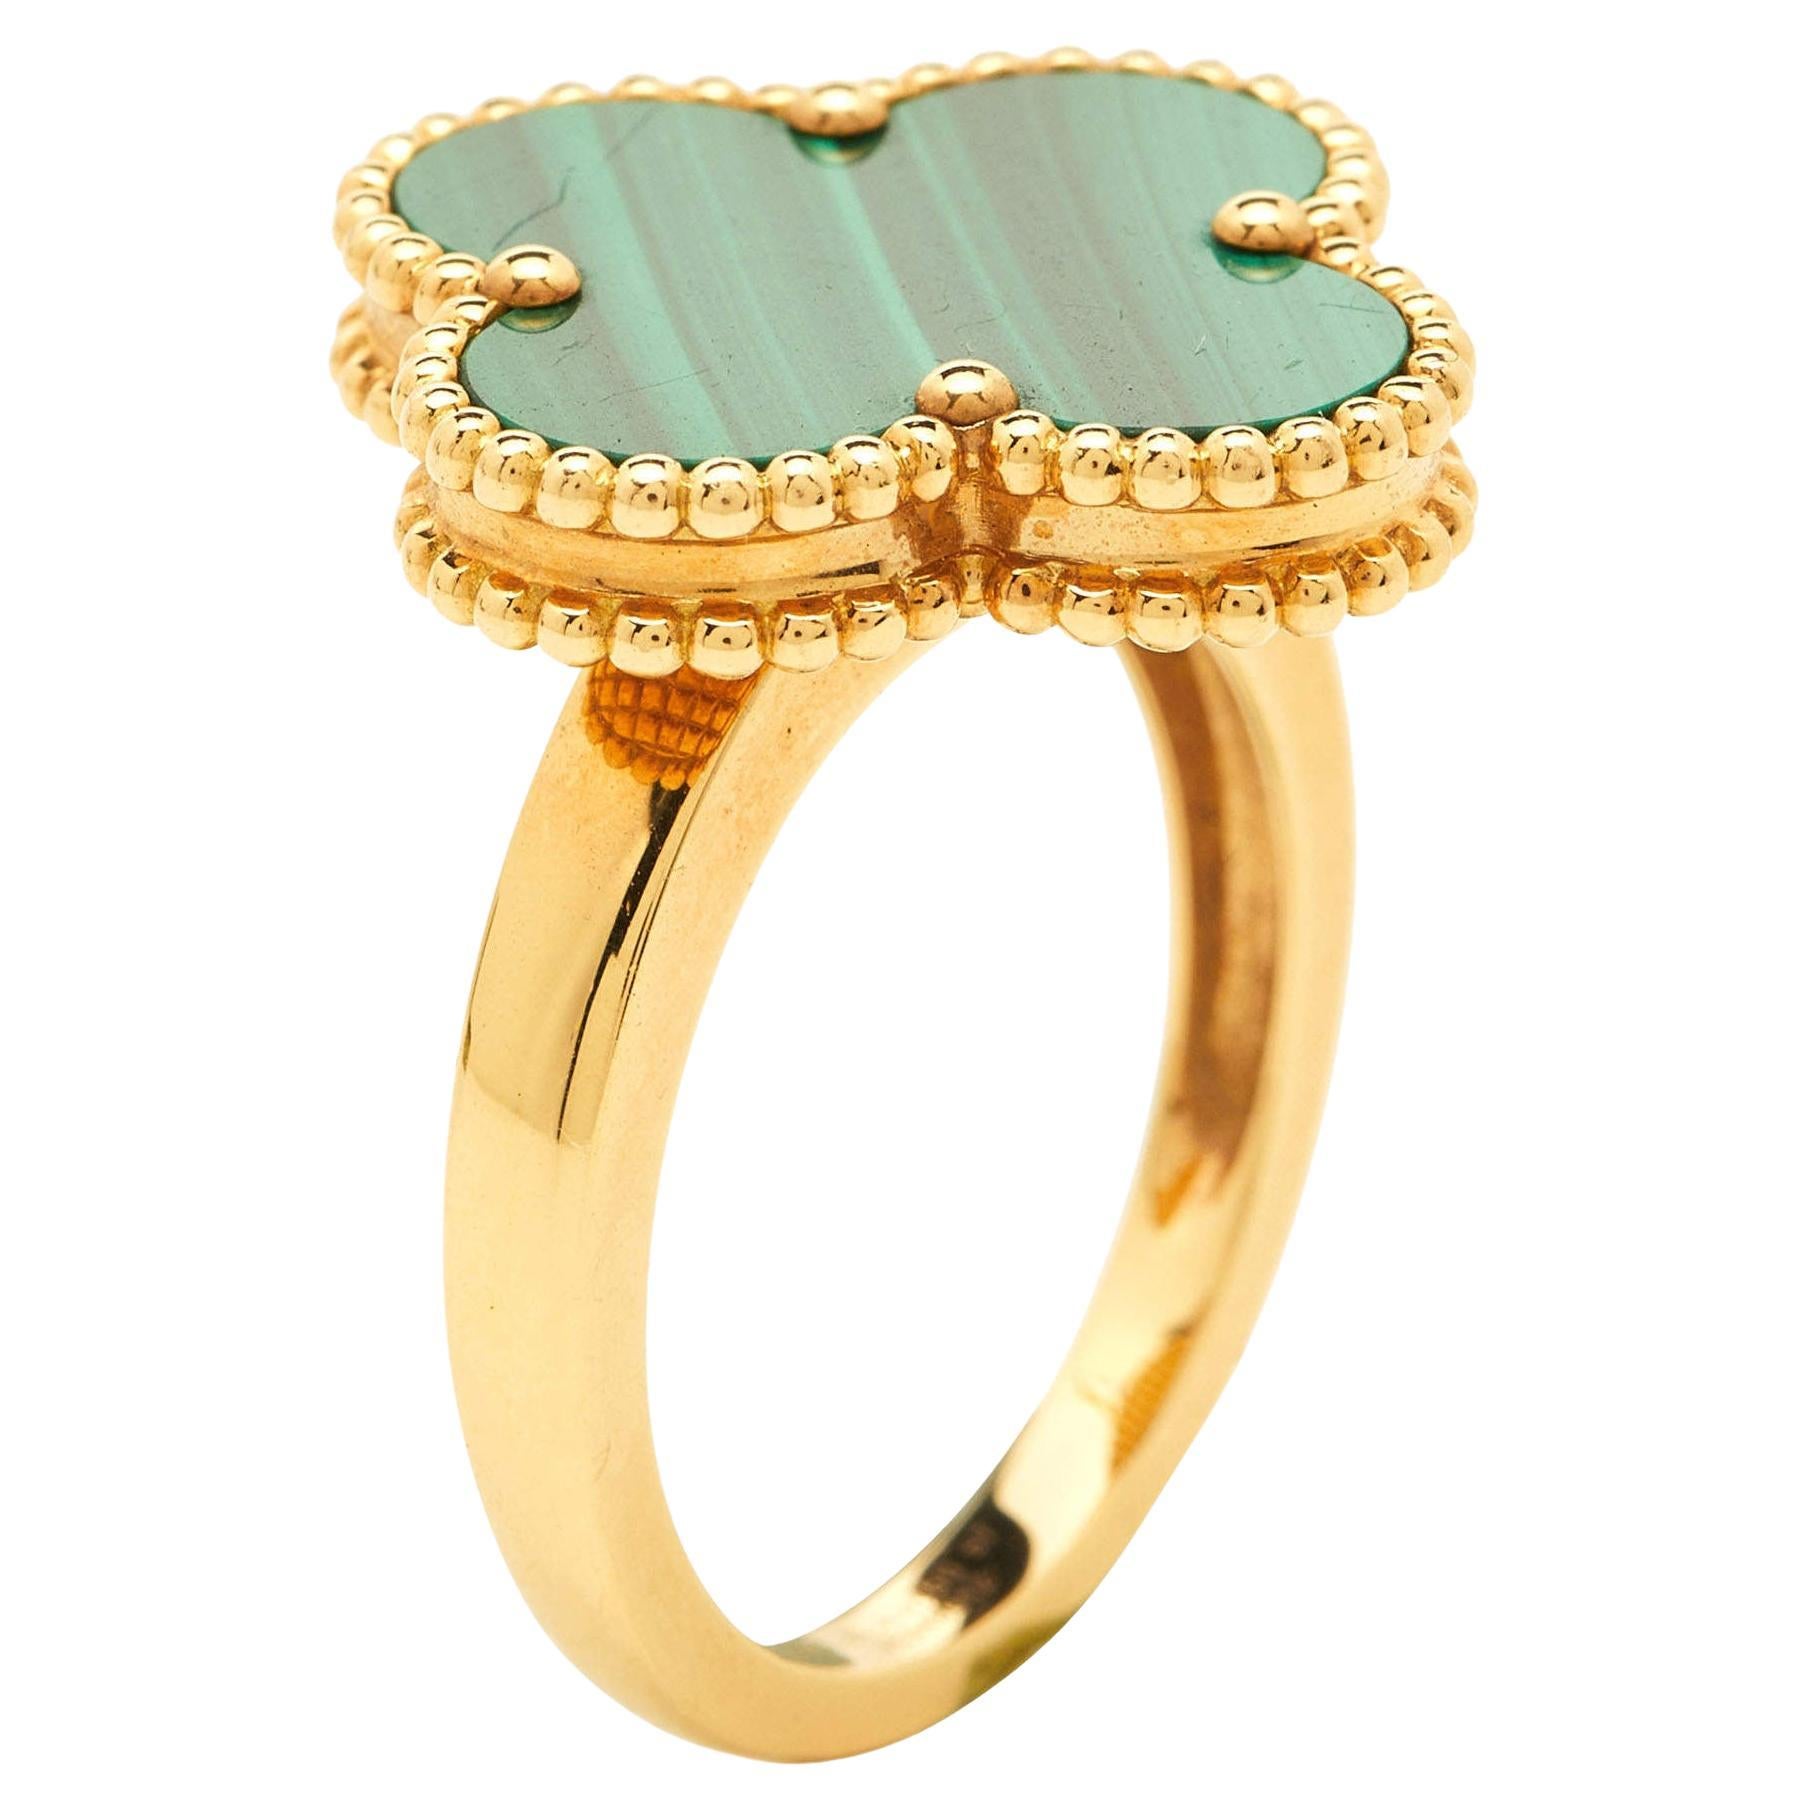 Van Cleef Arpels Alhambra malachite ring, mother of pearl